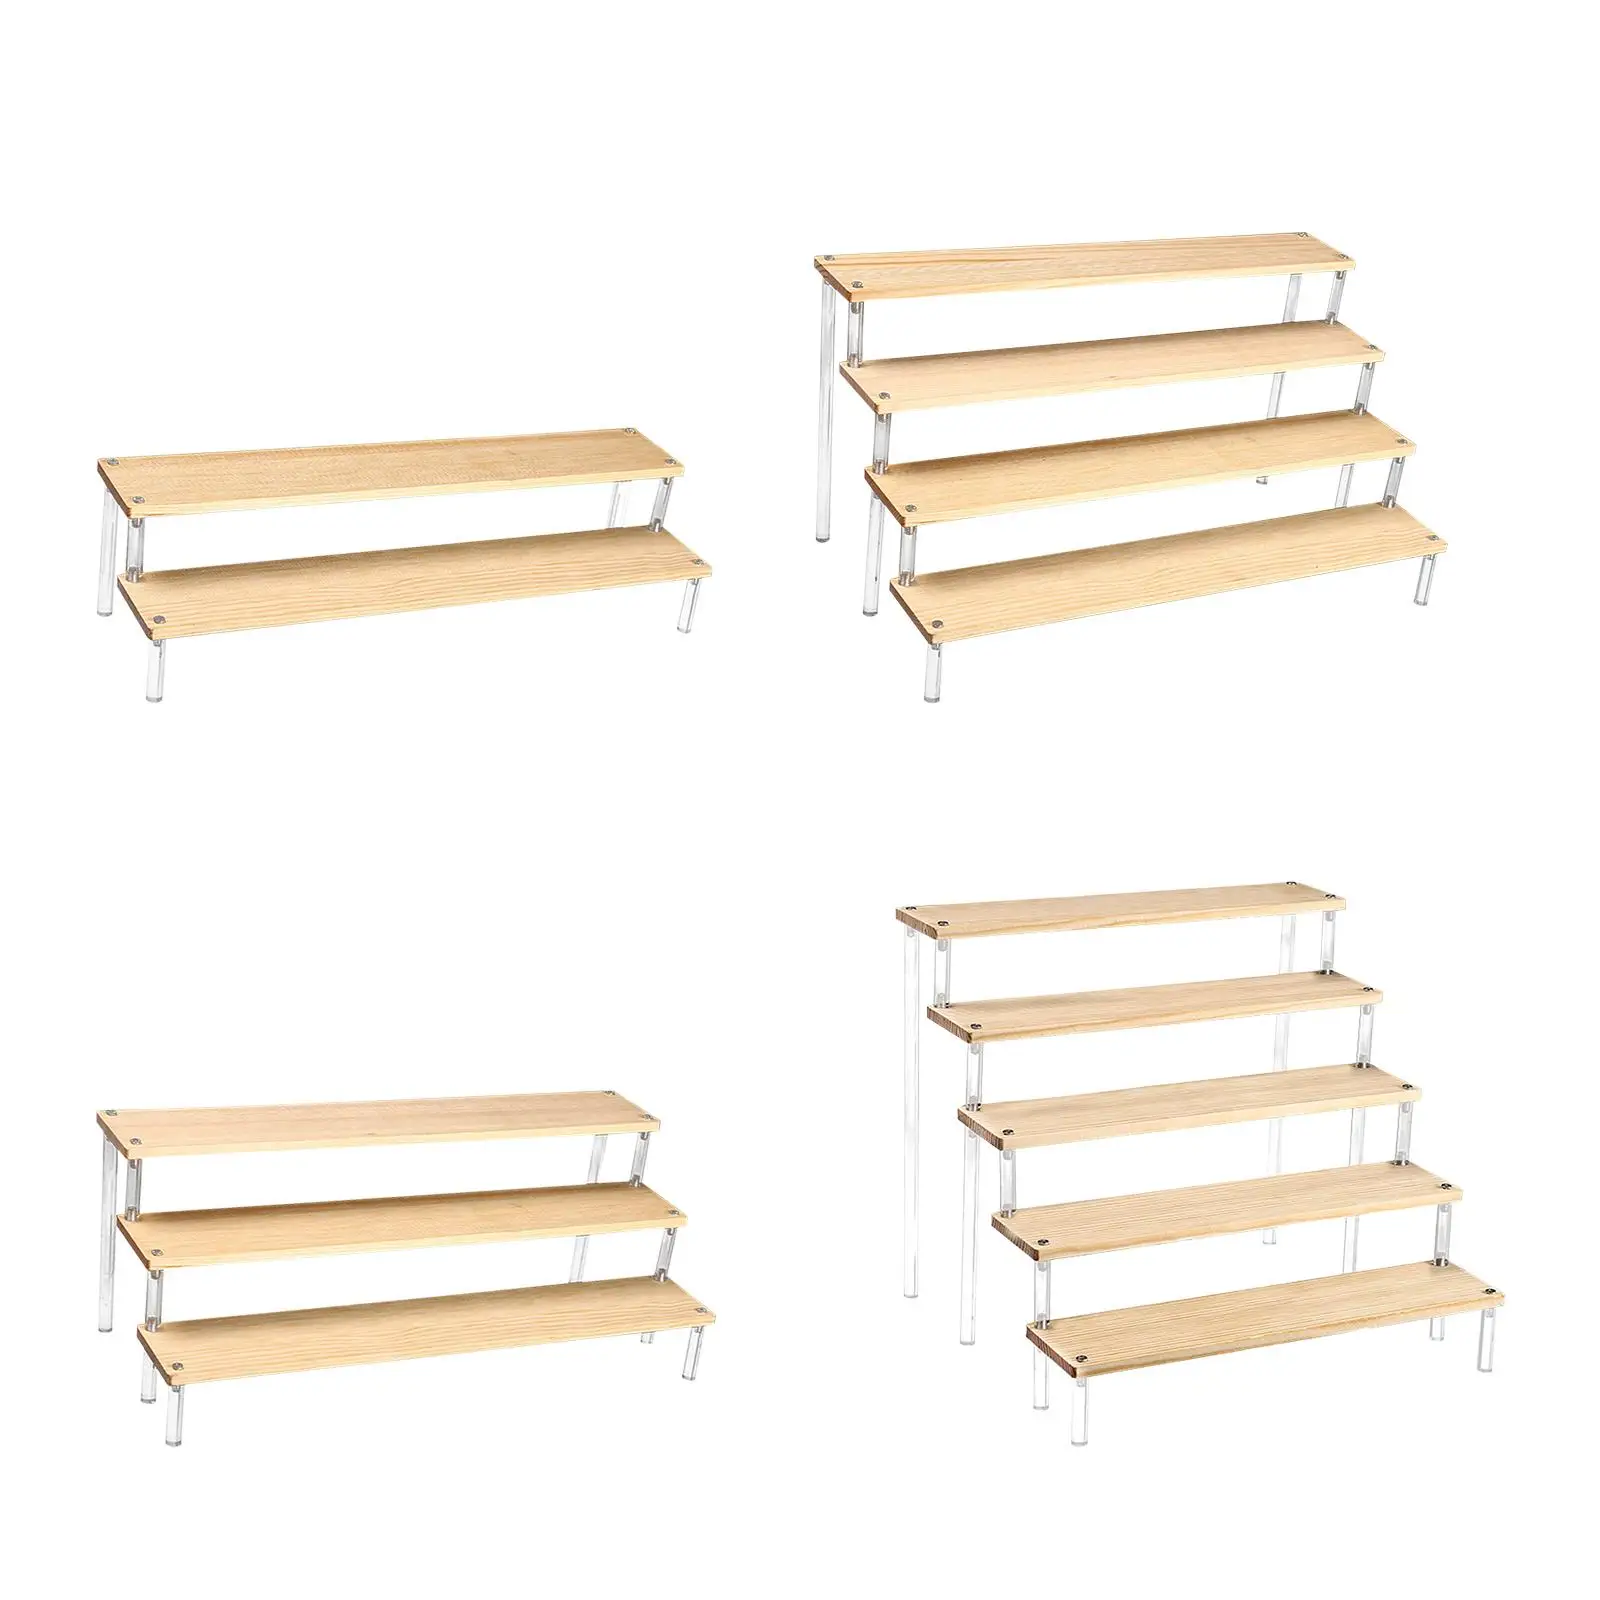 Clear Acrylic Display Riser Shelf Showcase Fixtures Storage Organizer Wood Display Stand for Doll Figure Model Collectibles Toys